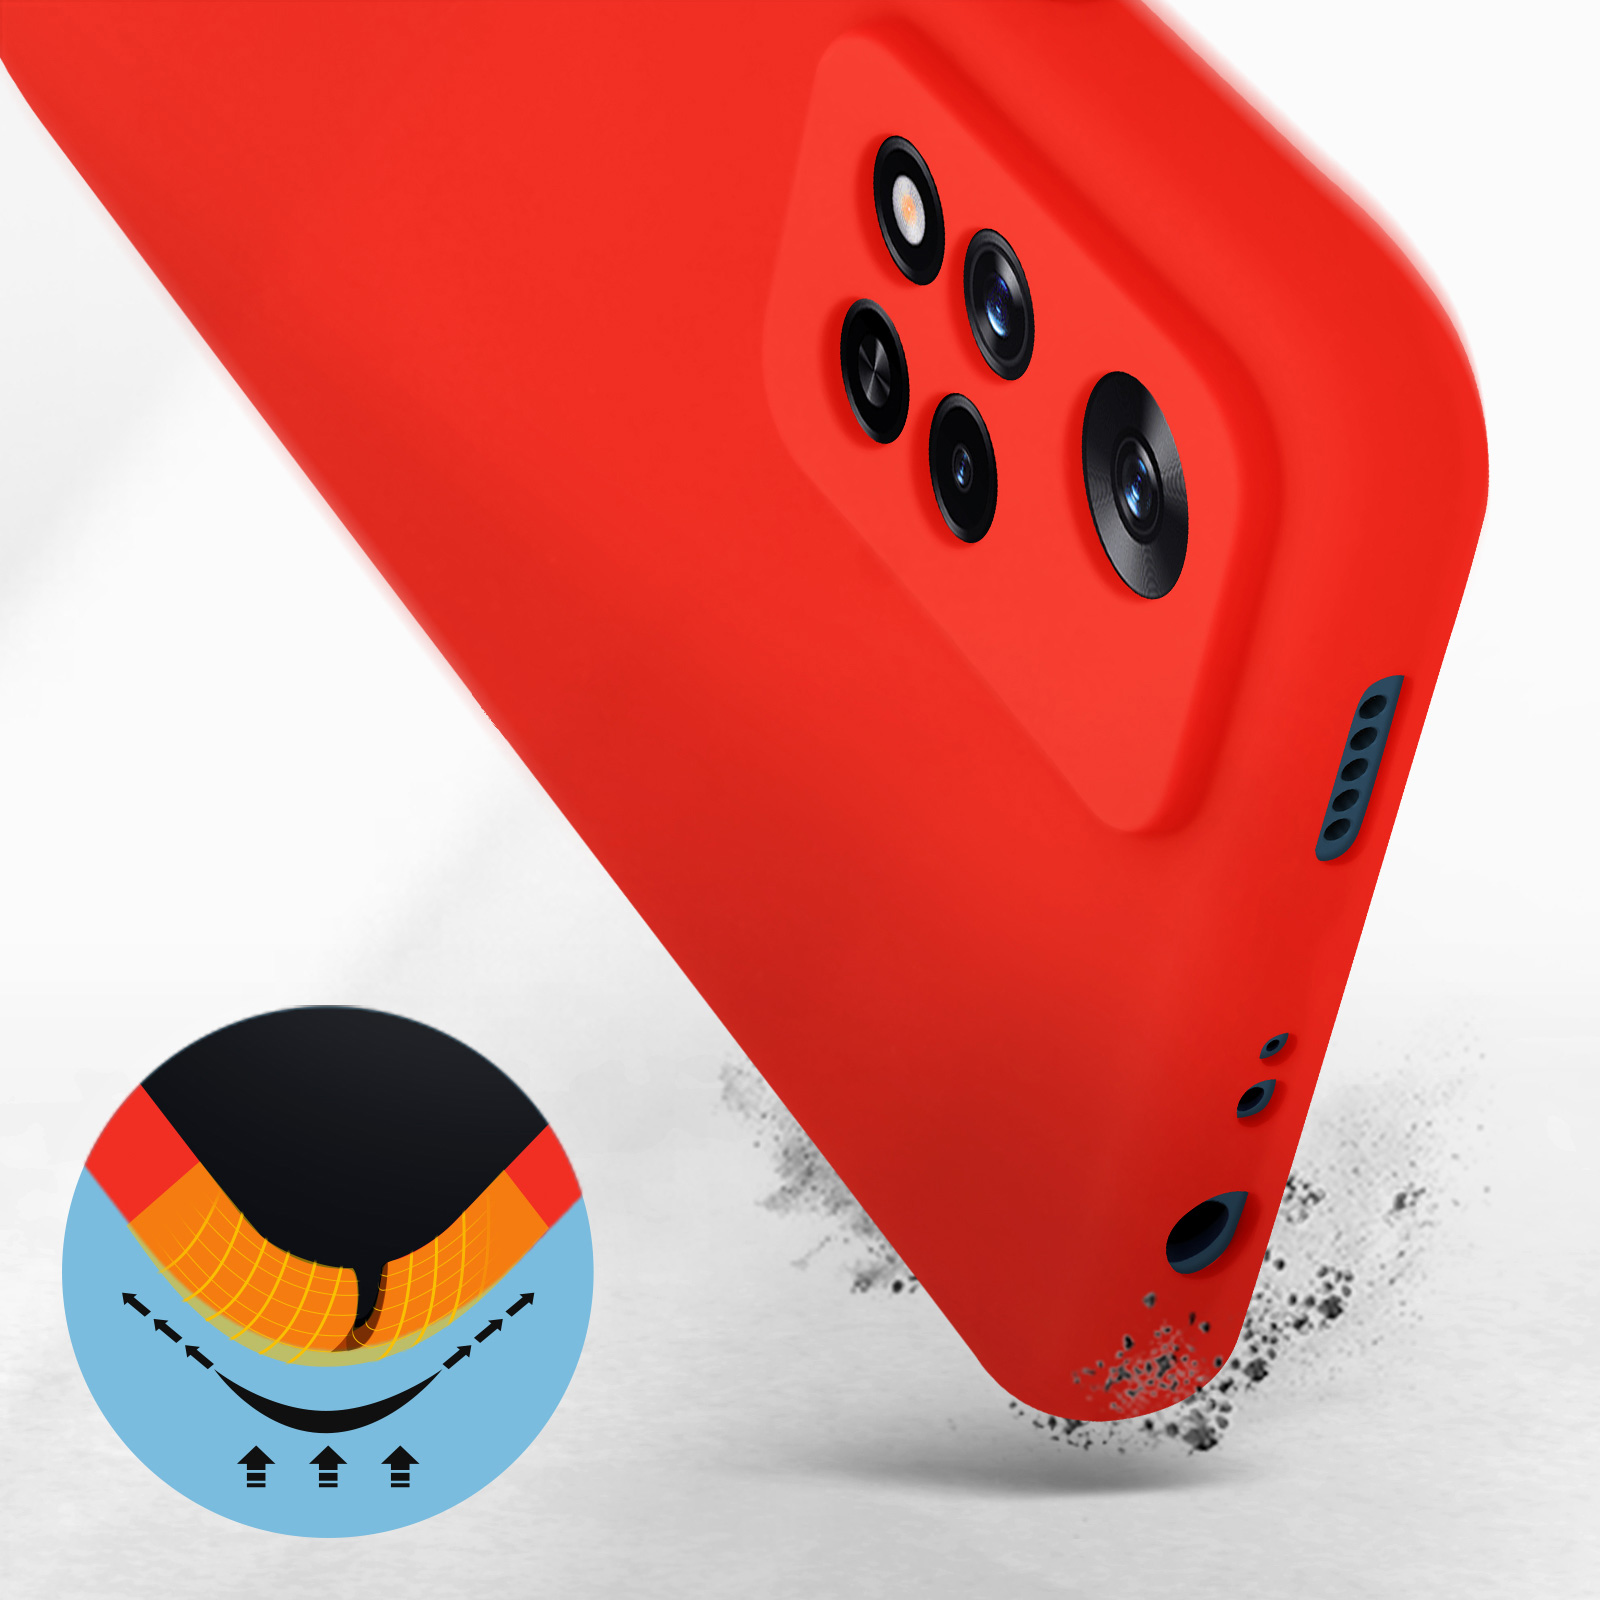 Soft Redmi Handyhülle Rot Pro Plus, 11 Xiaomi, AVIZAR Touch Note Series, Backcover,